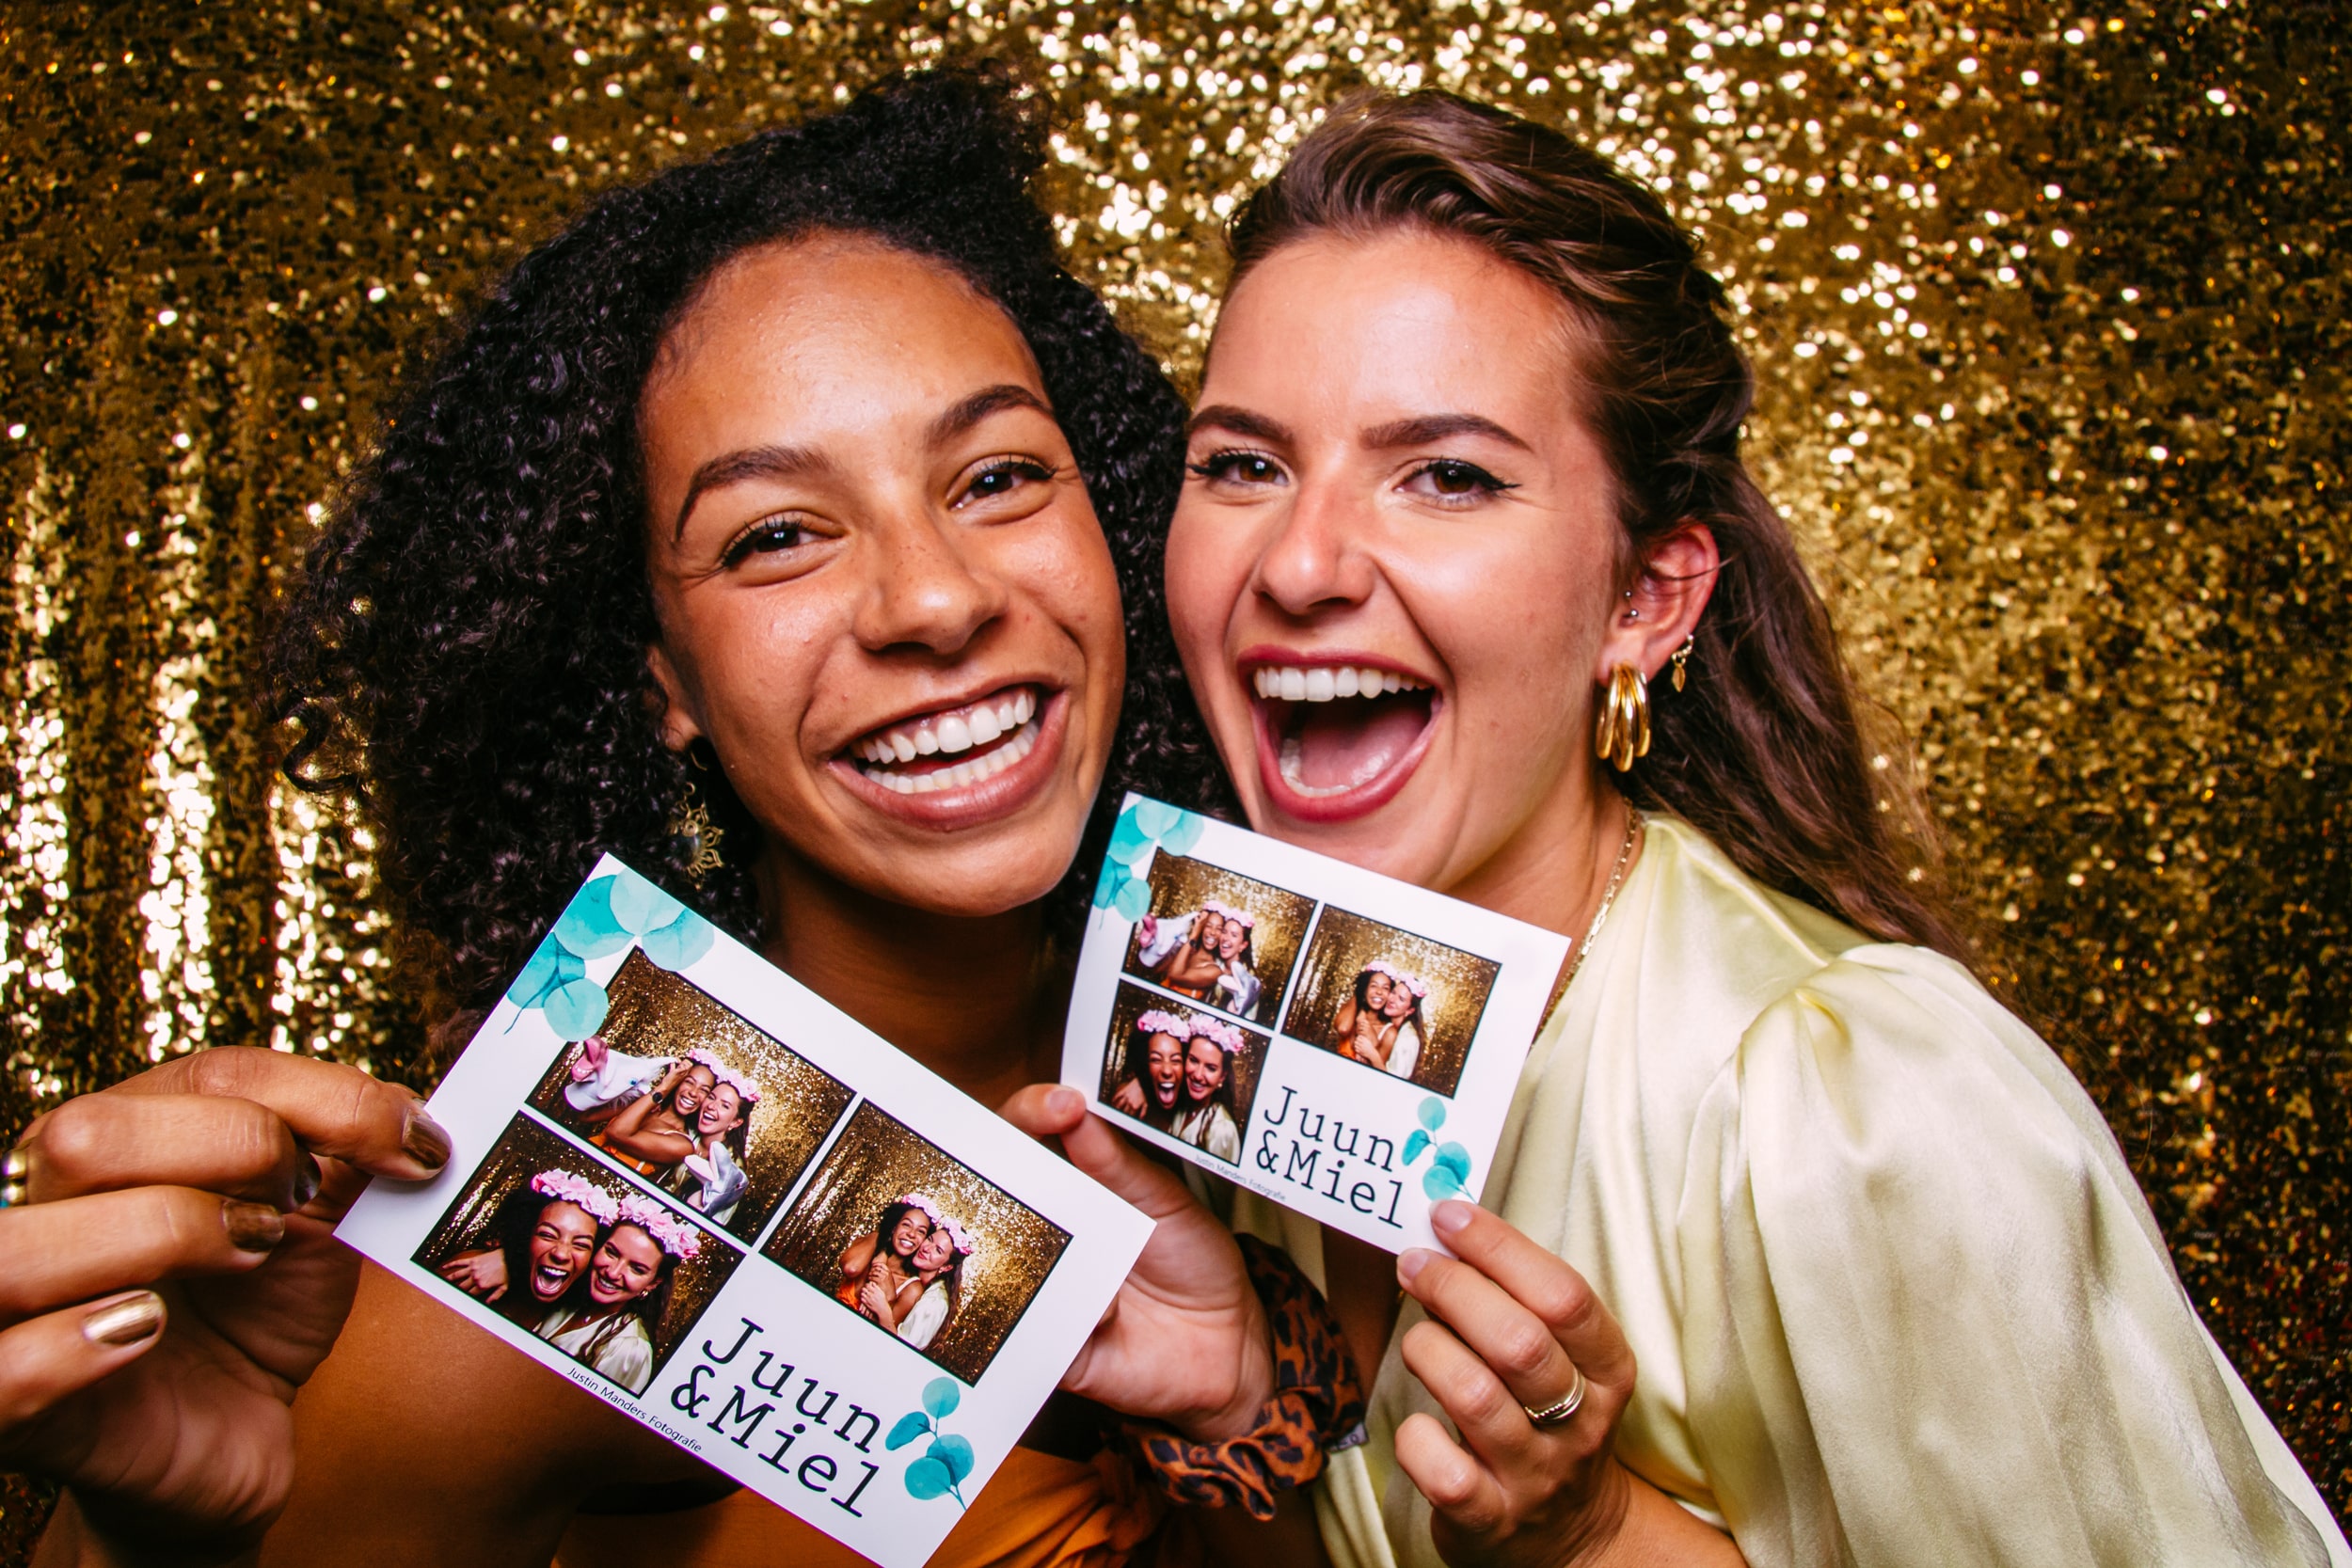 Two women in a photobooth at a wedding while holding up photos.